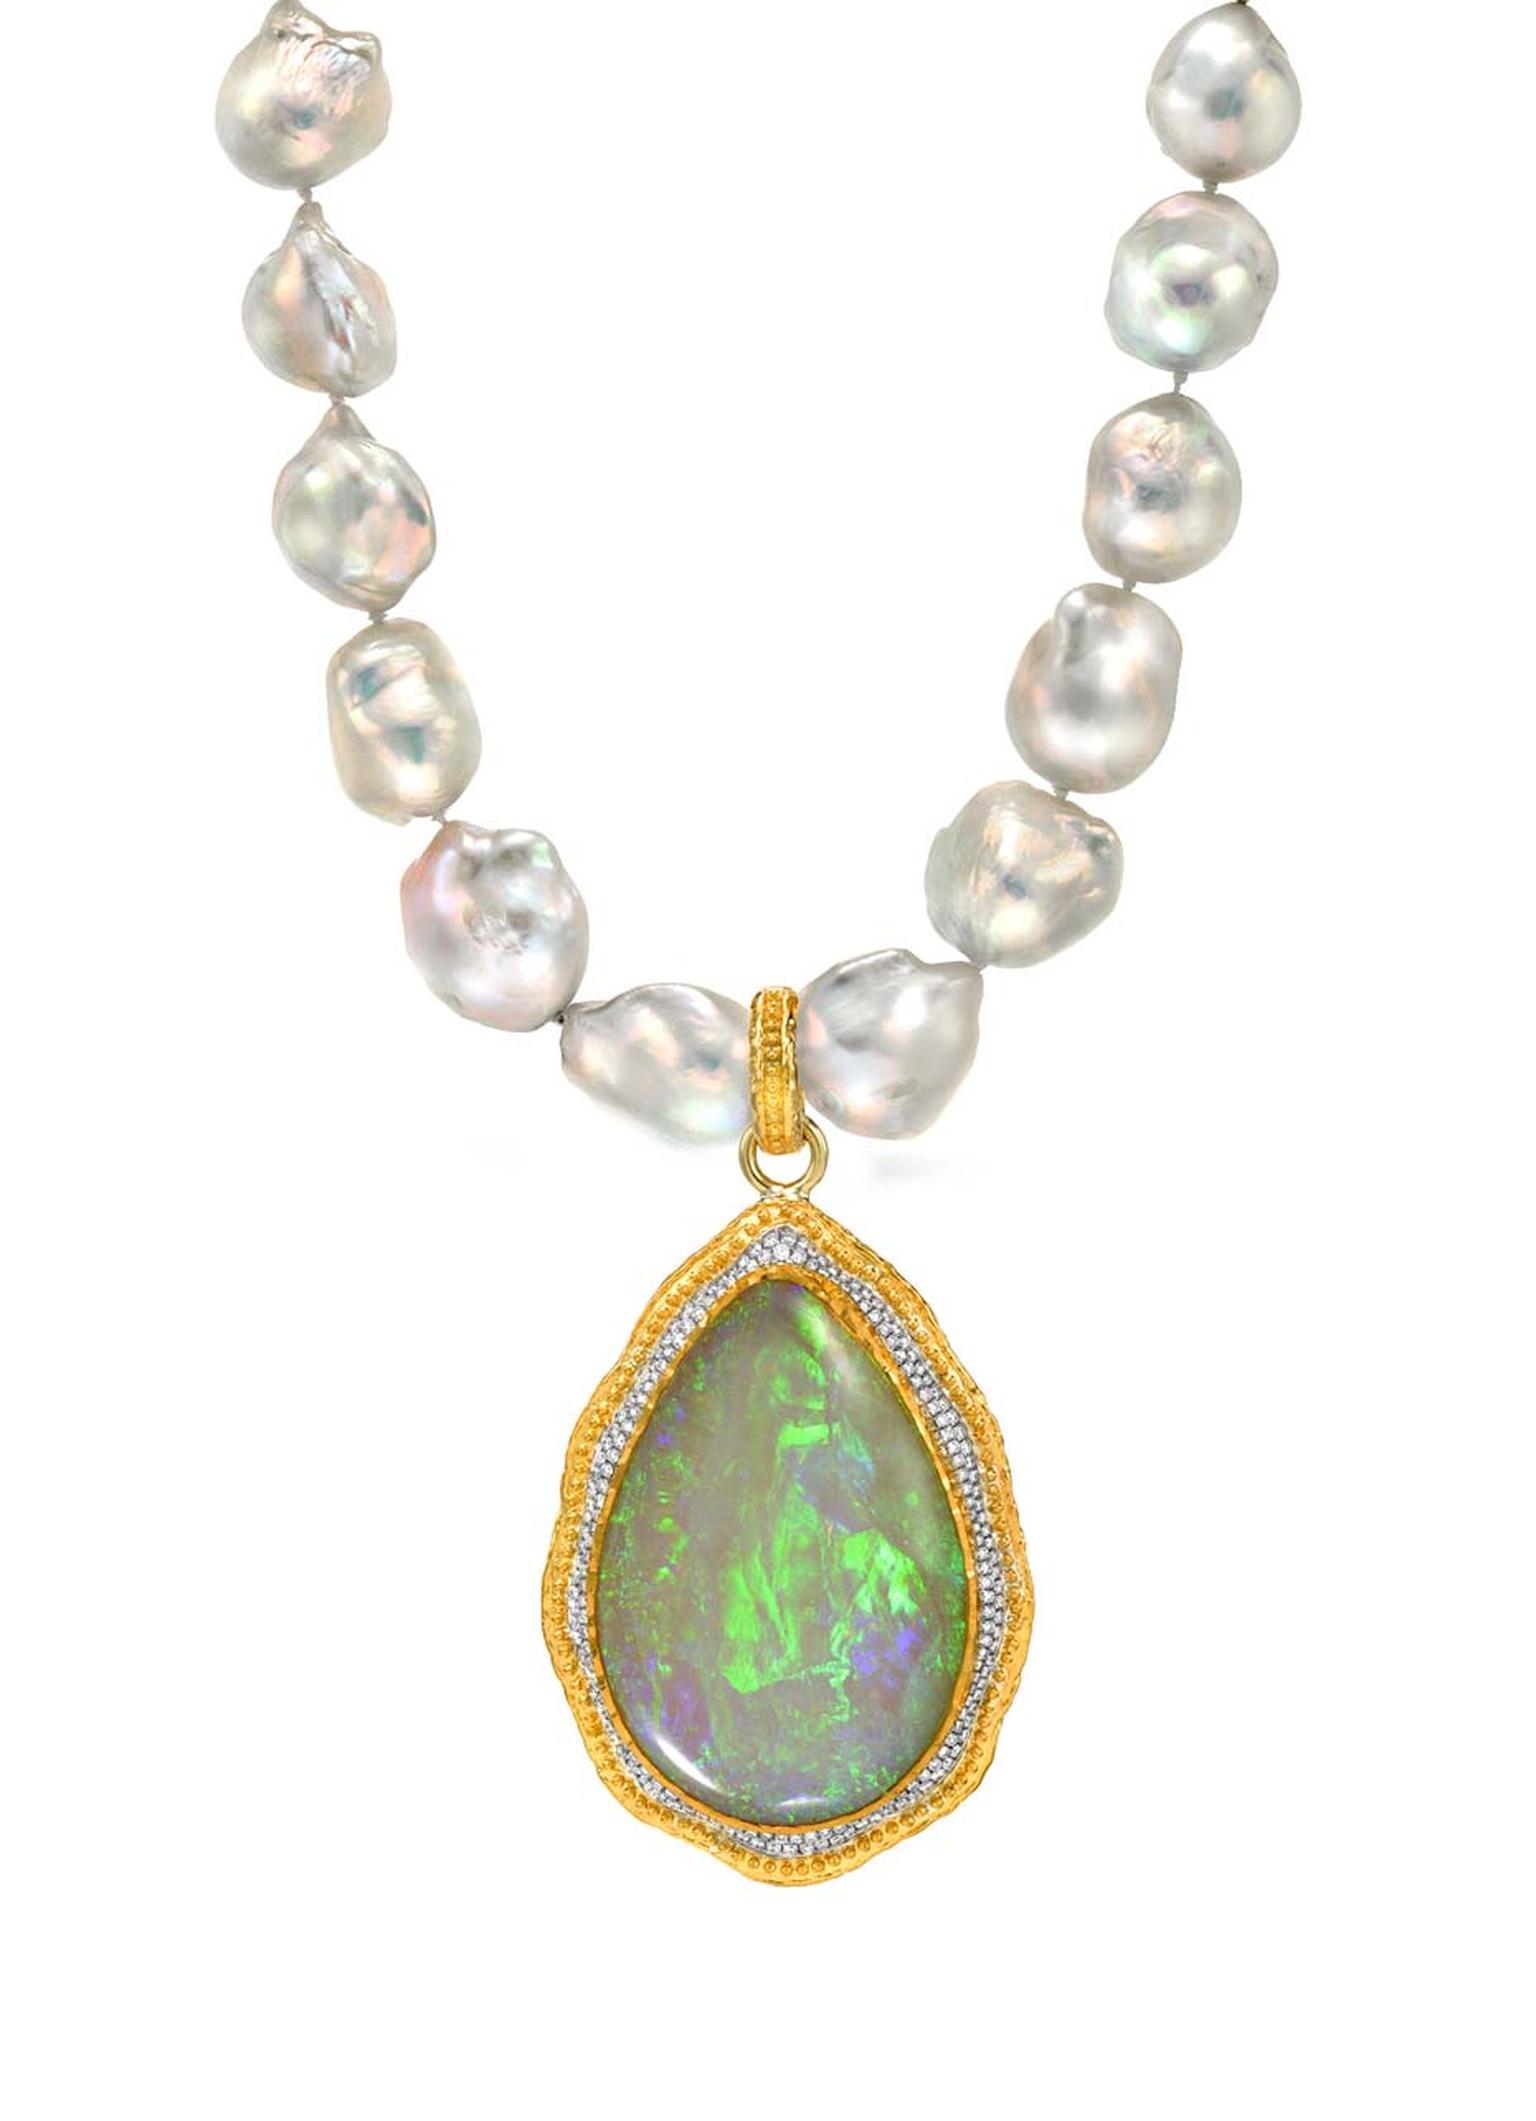 Victor Velyan gold and silver pendant with a central 36.55ct black opal surrounded by diamonds on a pearl necklace.